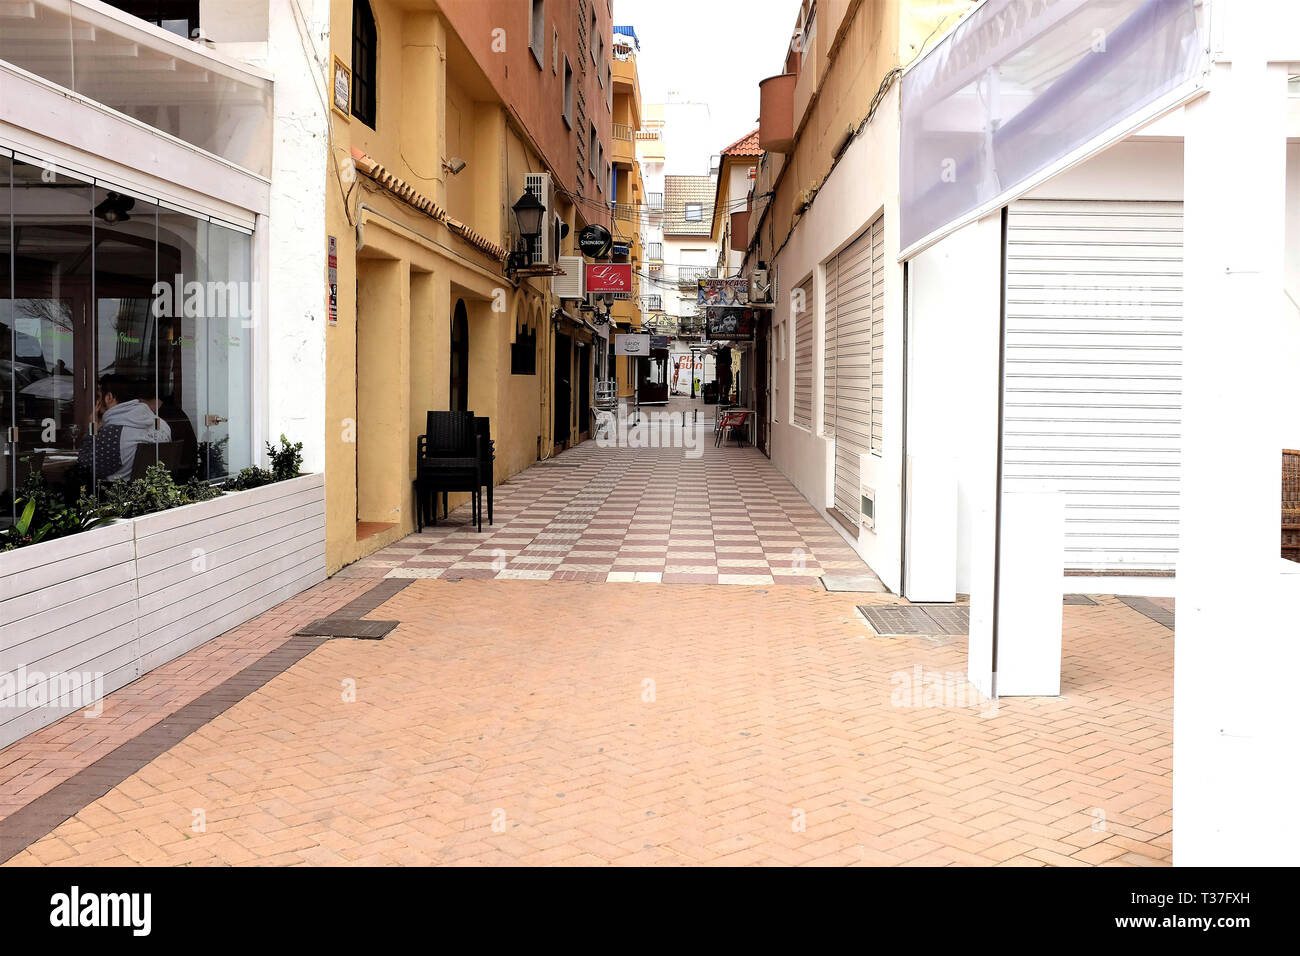 Fuengirola, Costa del Sol, Spain. March 29, 2019. Tourist attraction Manolo Fermandez alley with bars and shops at Fuengirola on the Costa del Sol. Stock Photo